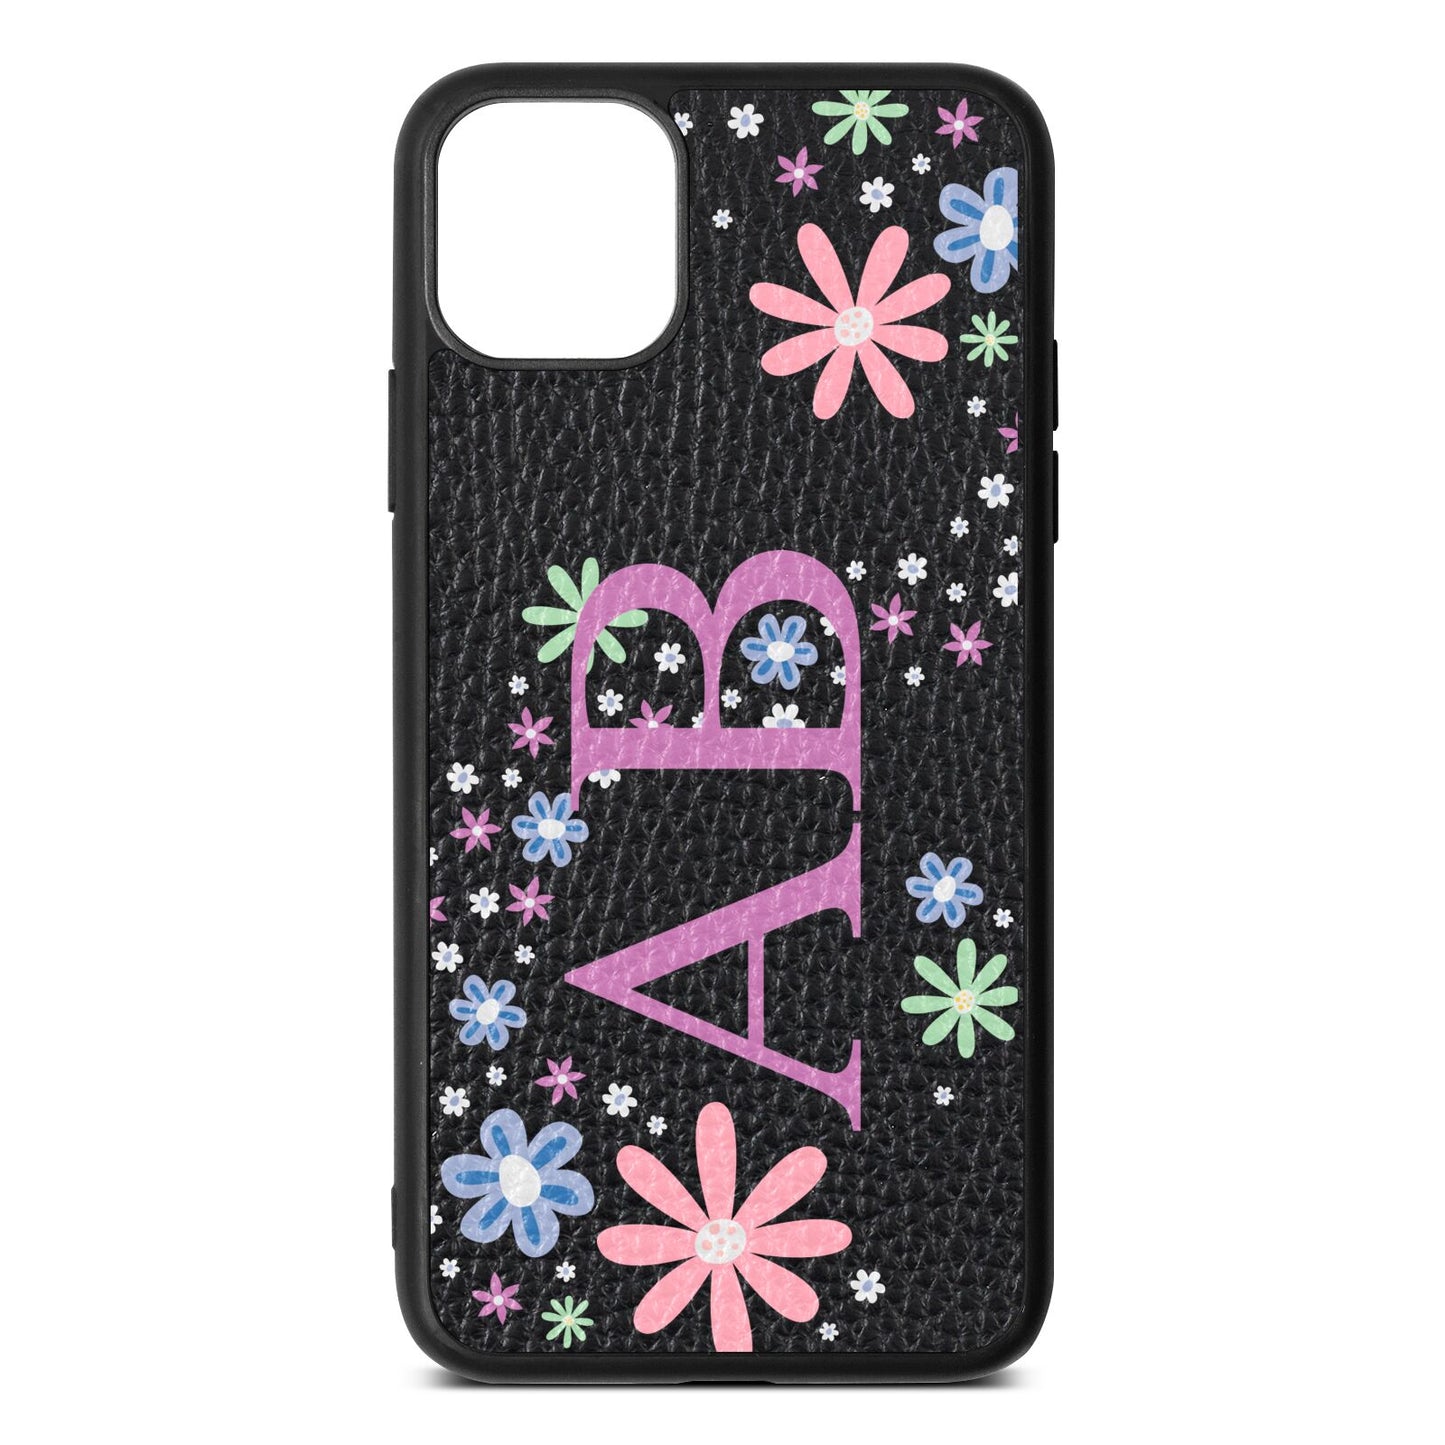 Personalised Floral Initials Black Pebble Leather iPhone 11 Pro Max Case